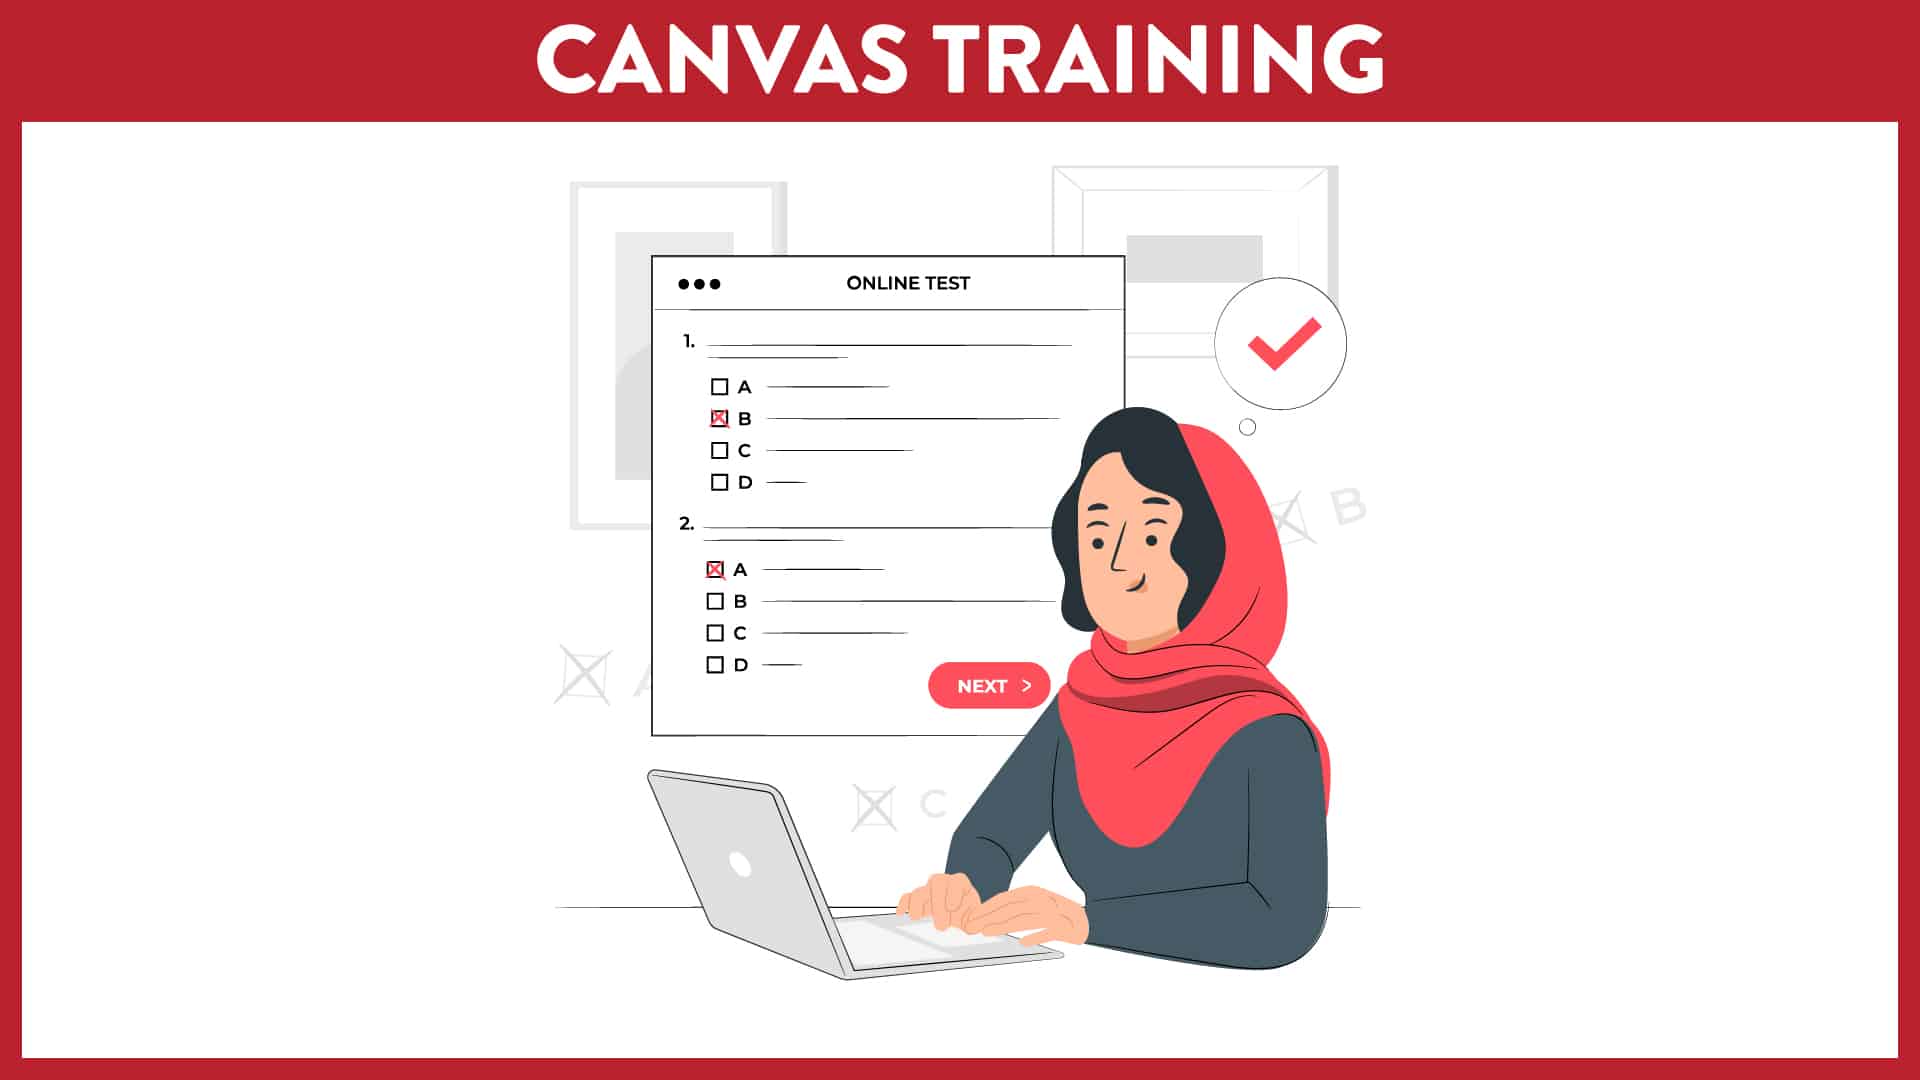 Quizzing better in Canvas - Training Event Cover Image